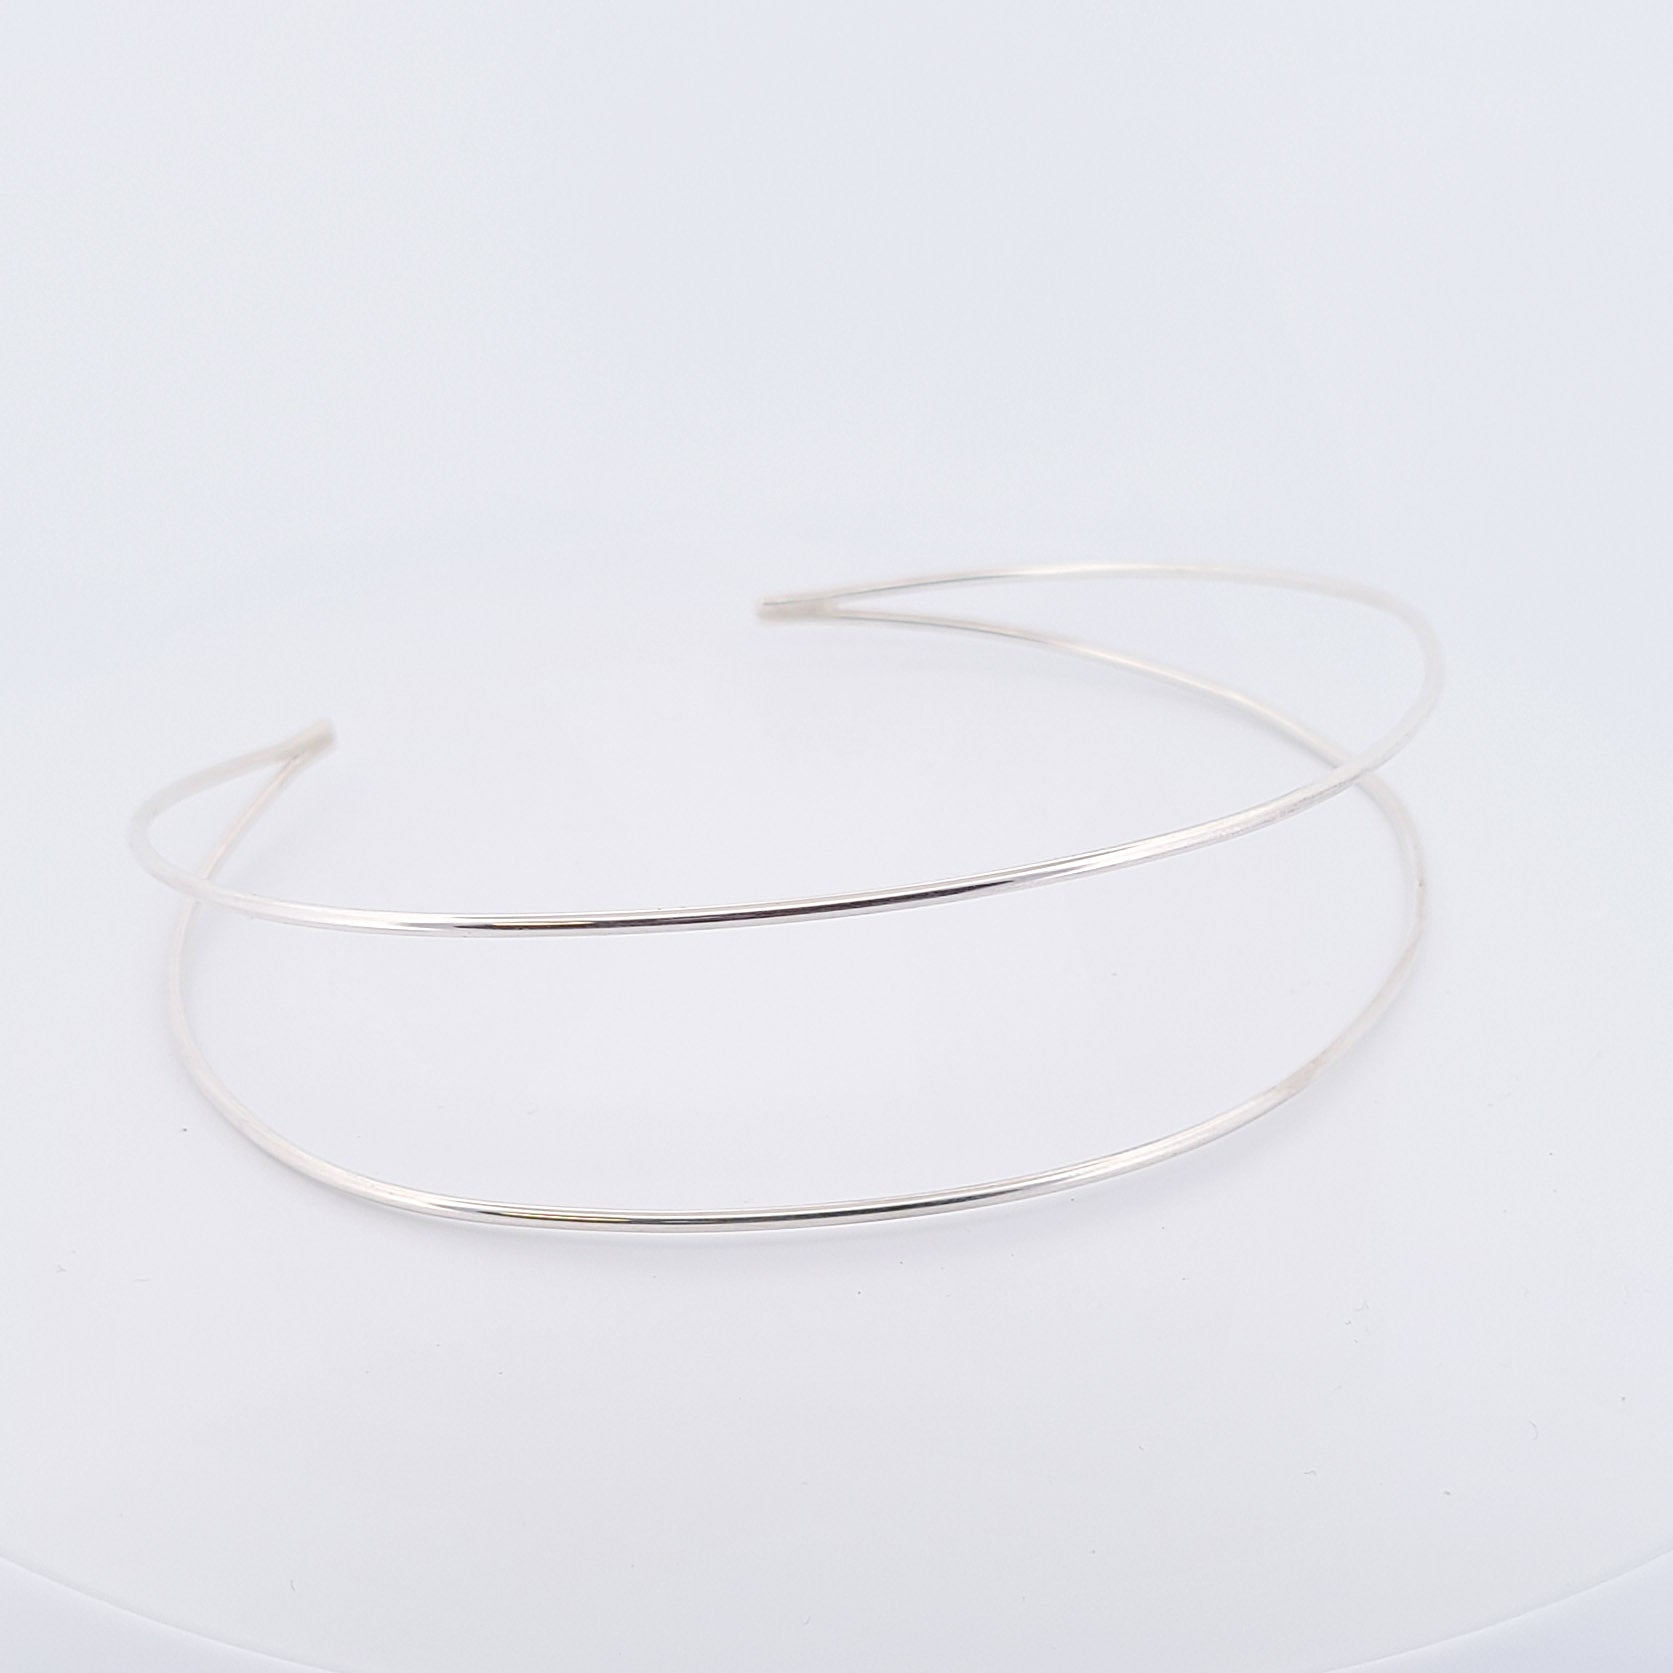 Minimal Silver Collar Choker - As featured in Wakanda Forever